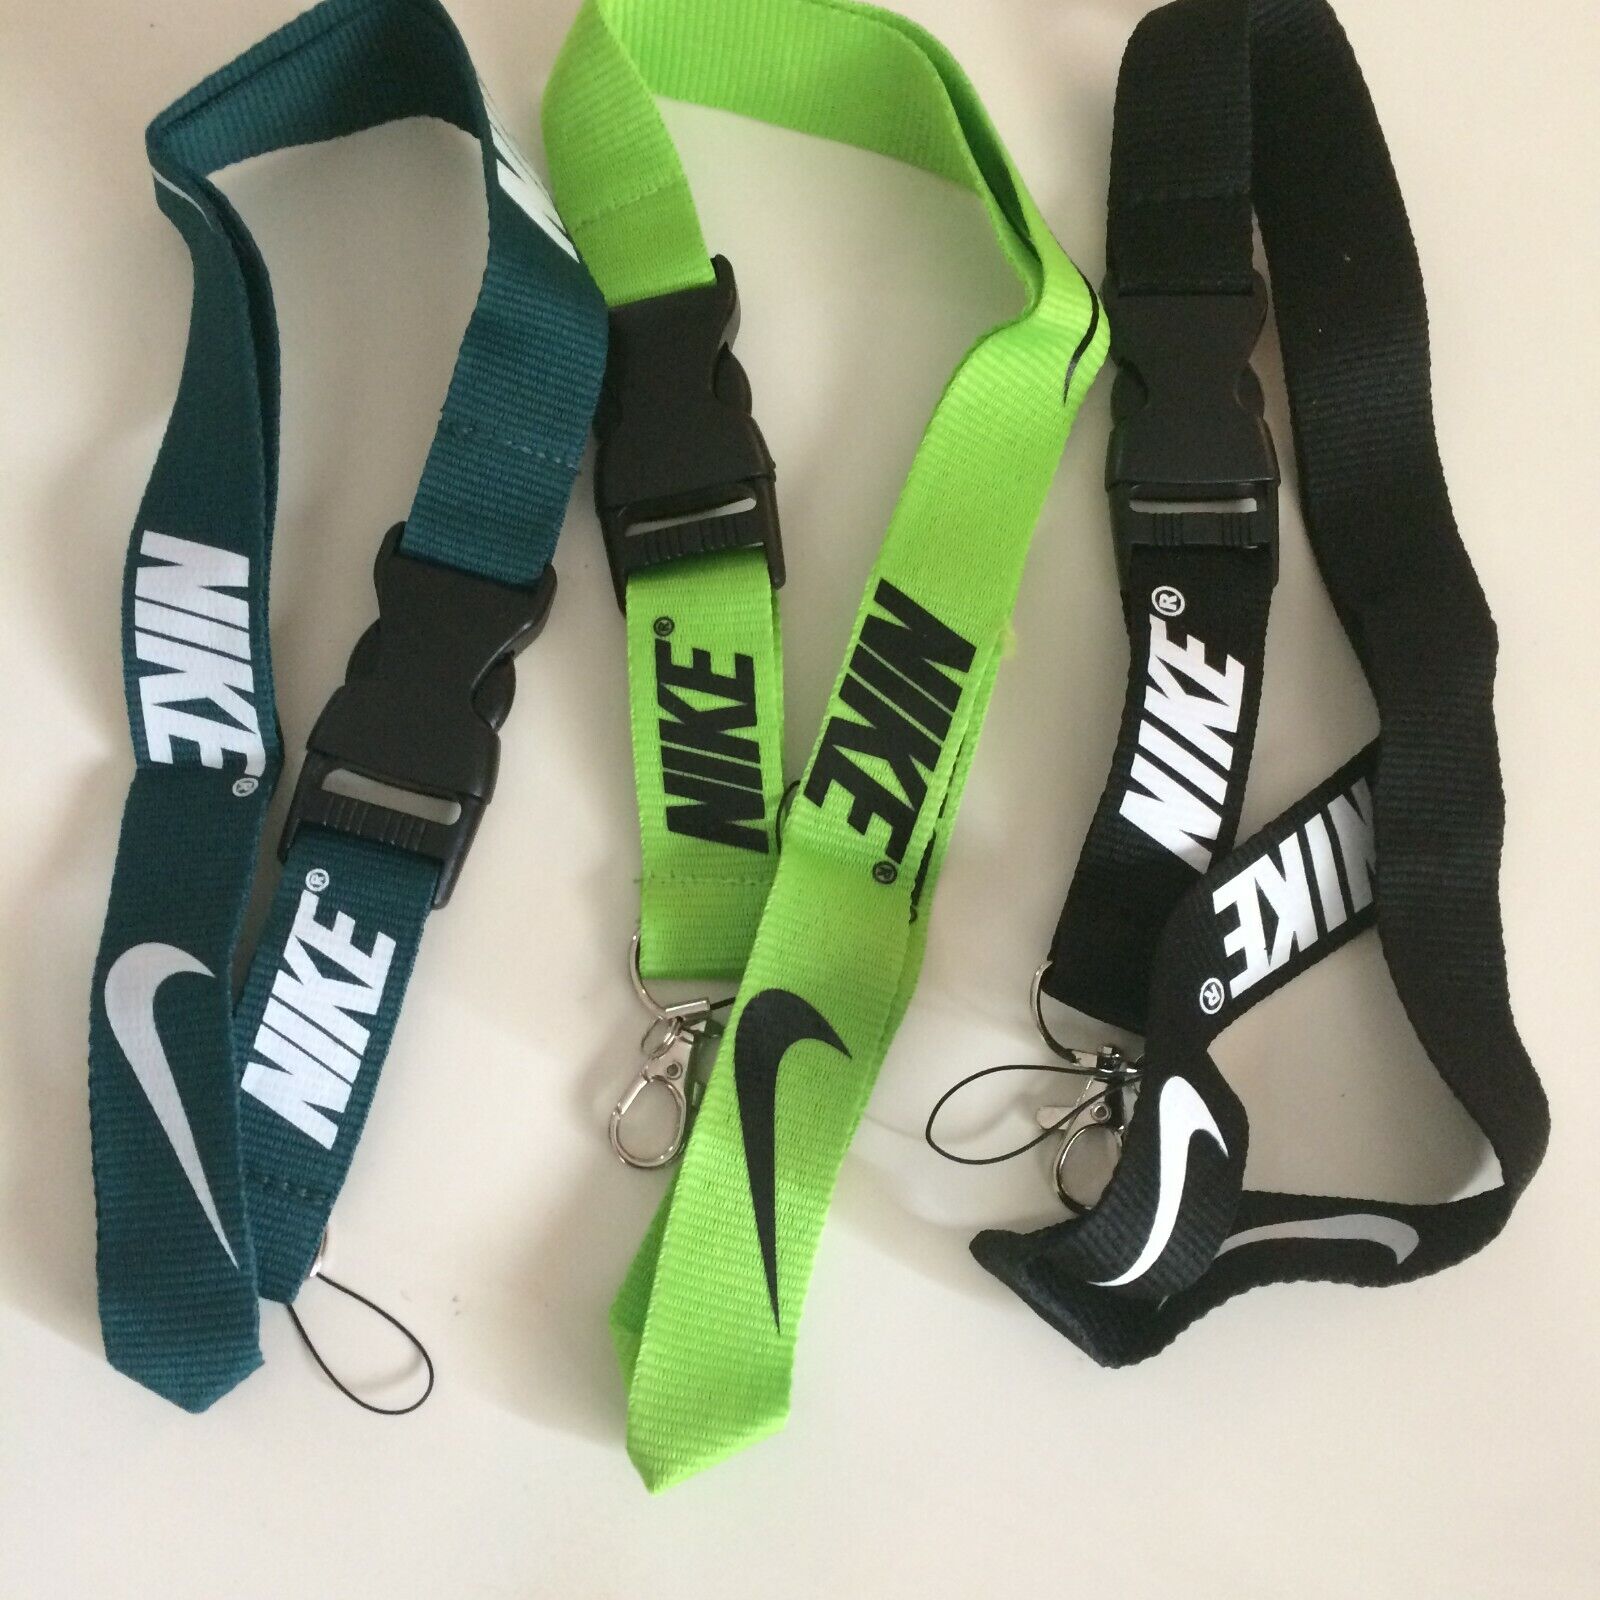 Nike Lanyard Set of 3 Neck Strap Quick Release Keychain NEW White Logo  3-Colors